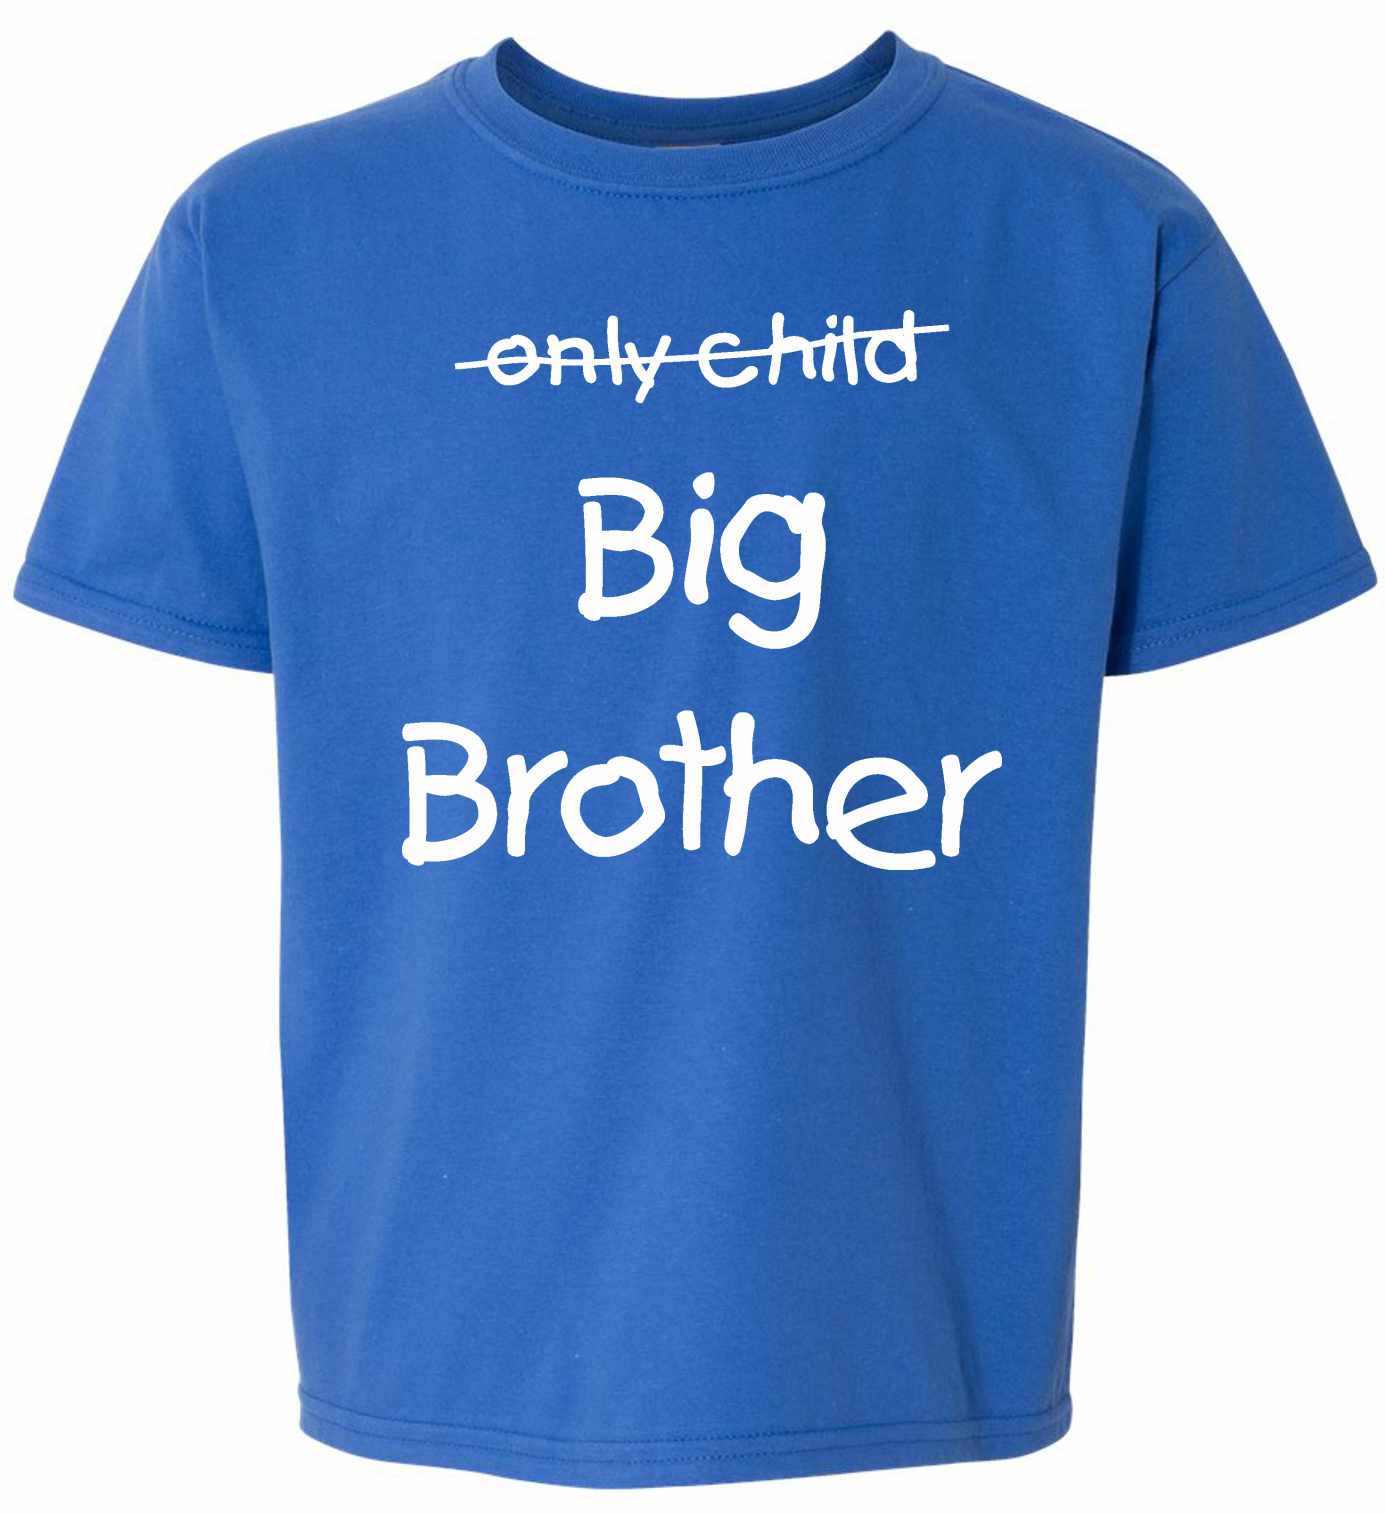 Only Child BIG BROTHER on Kids T-Shirt